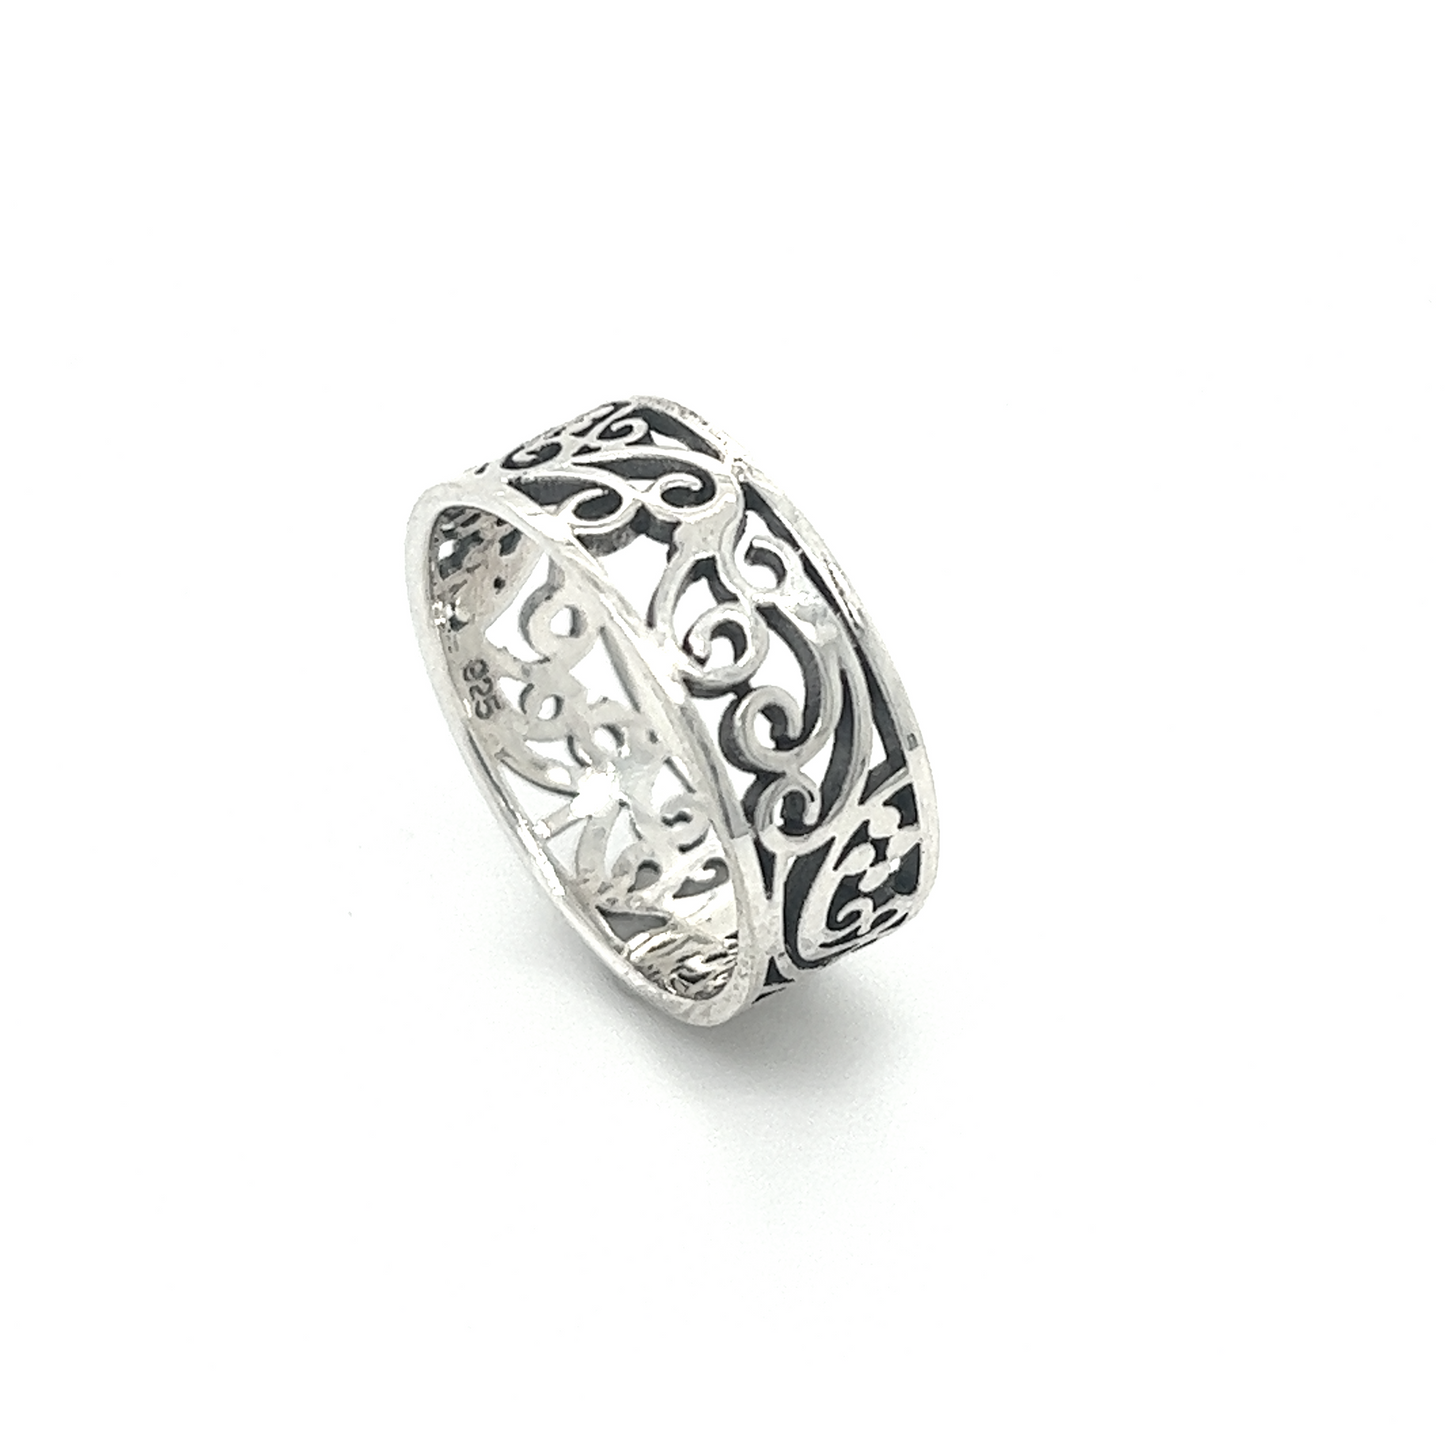 A stunning silver ring with a Thick Filigree Square Band design.